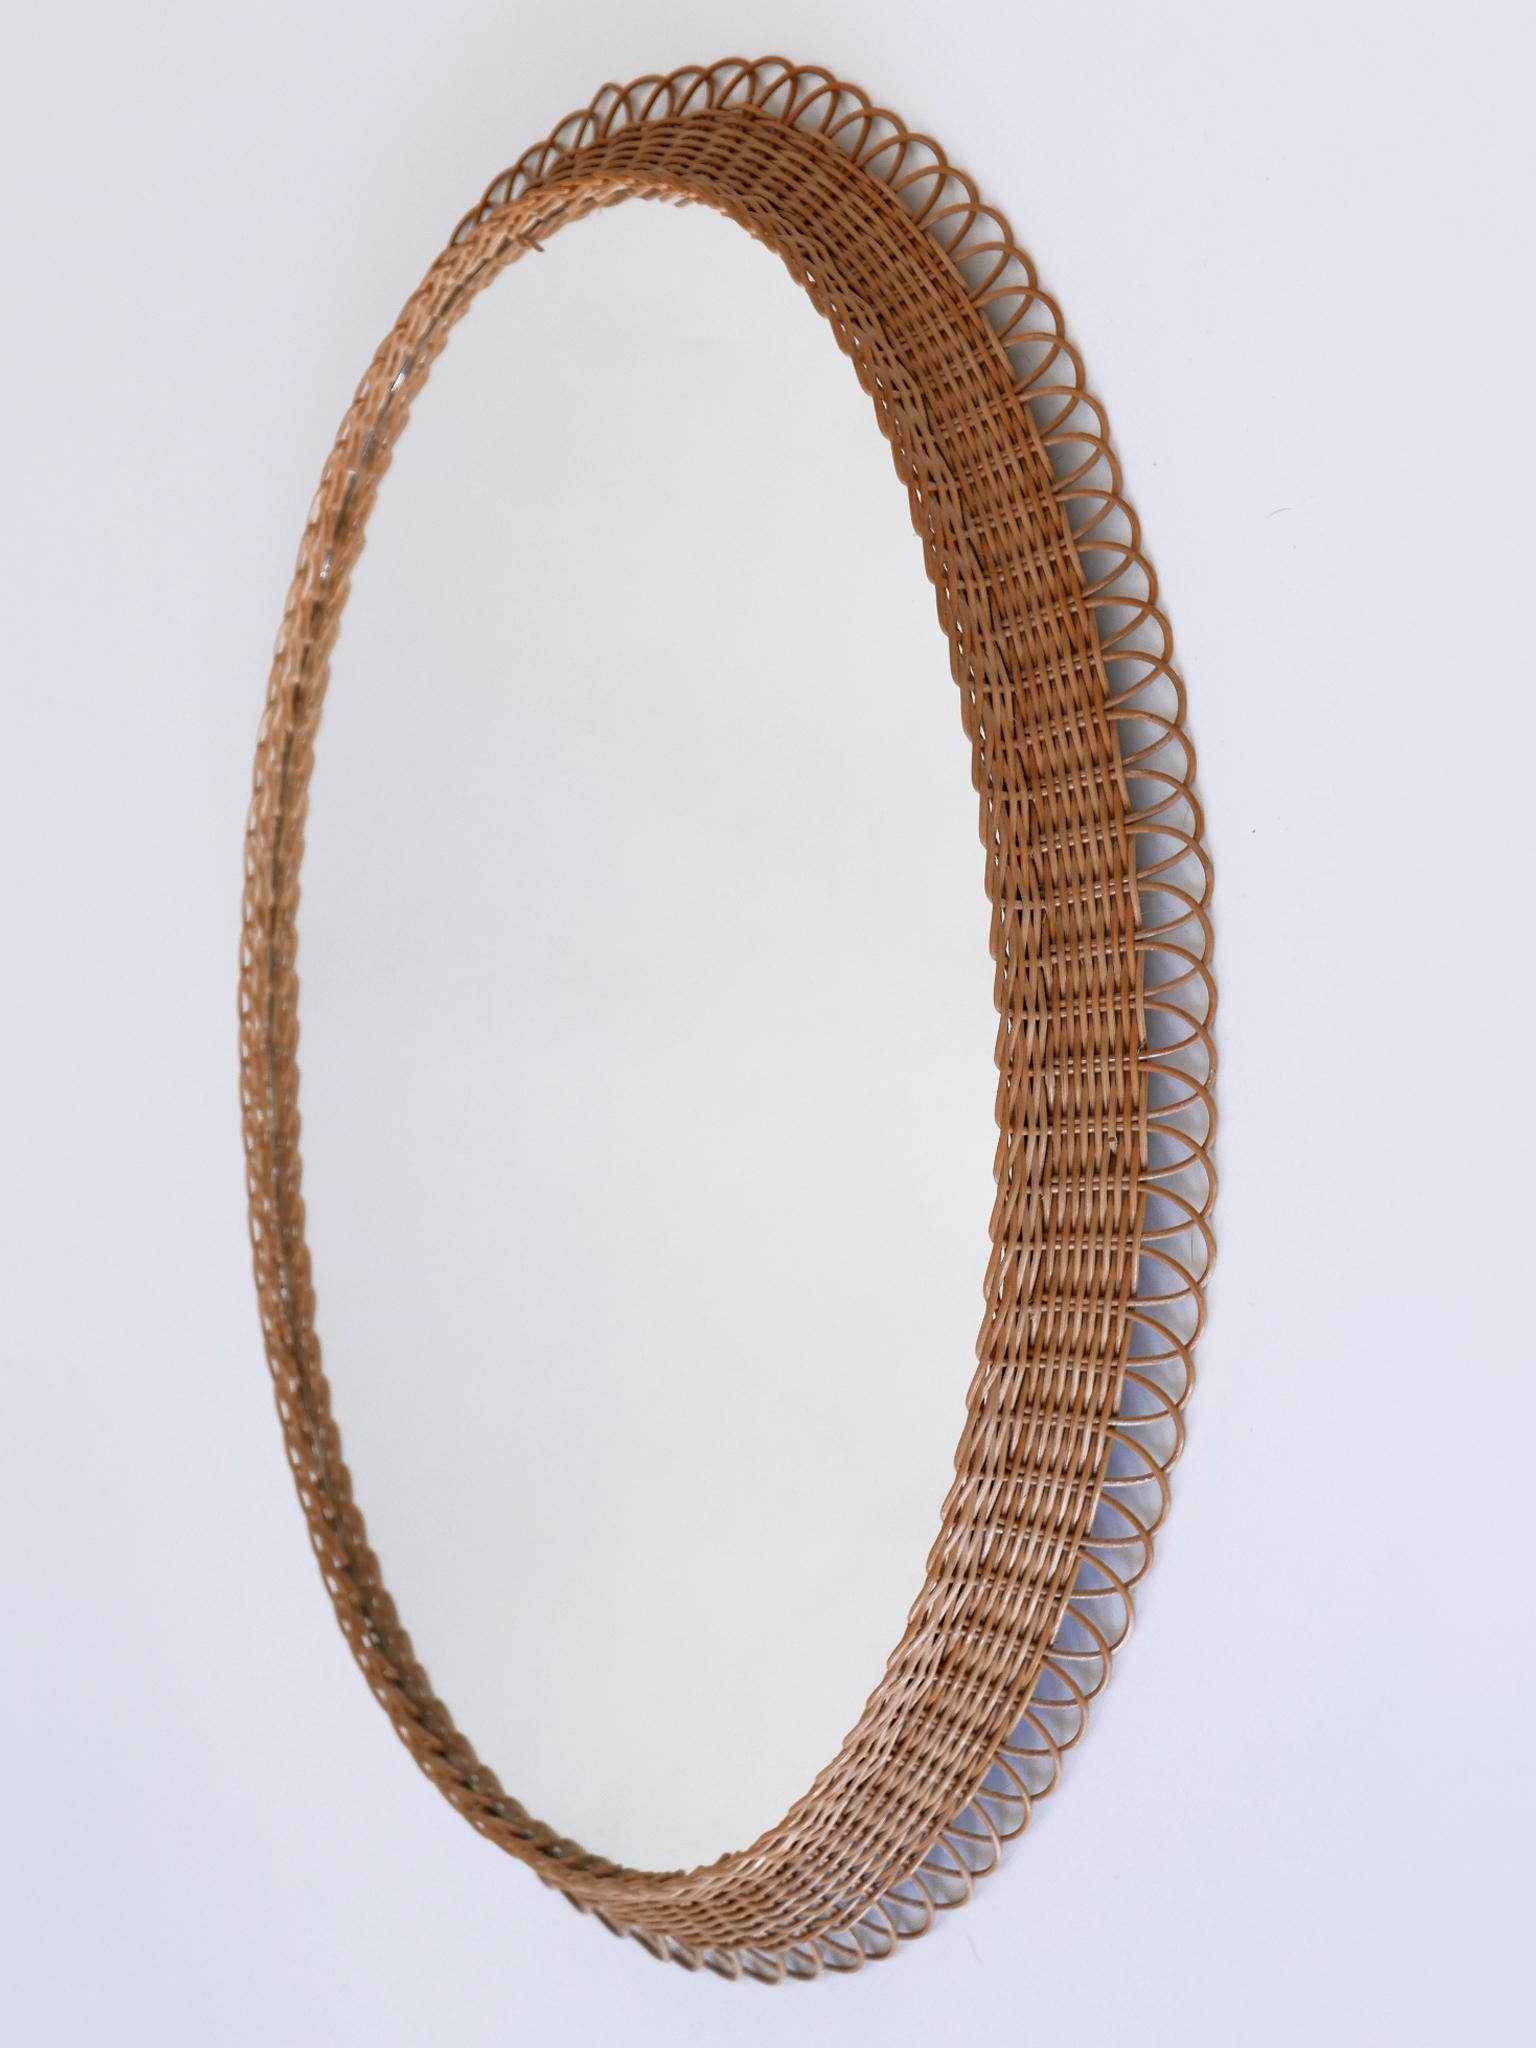 Decorative Mid-Century Modern Rattan Oval Wall Mirror Germany, 1960s For Sale 5